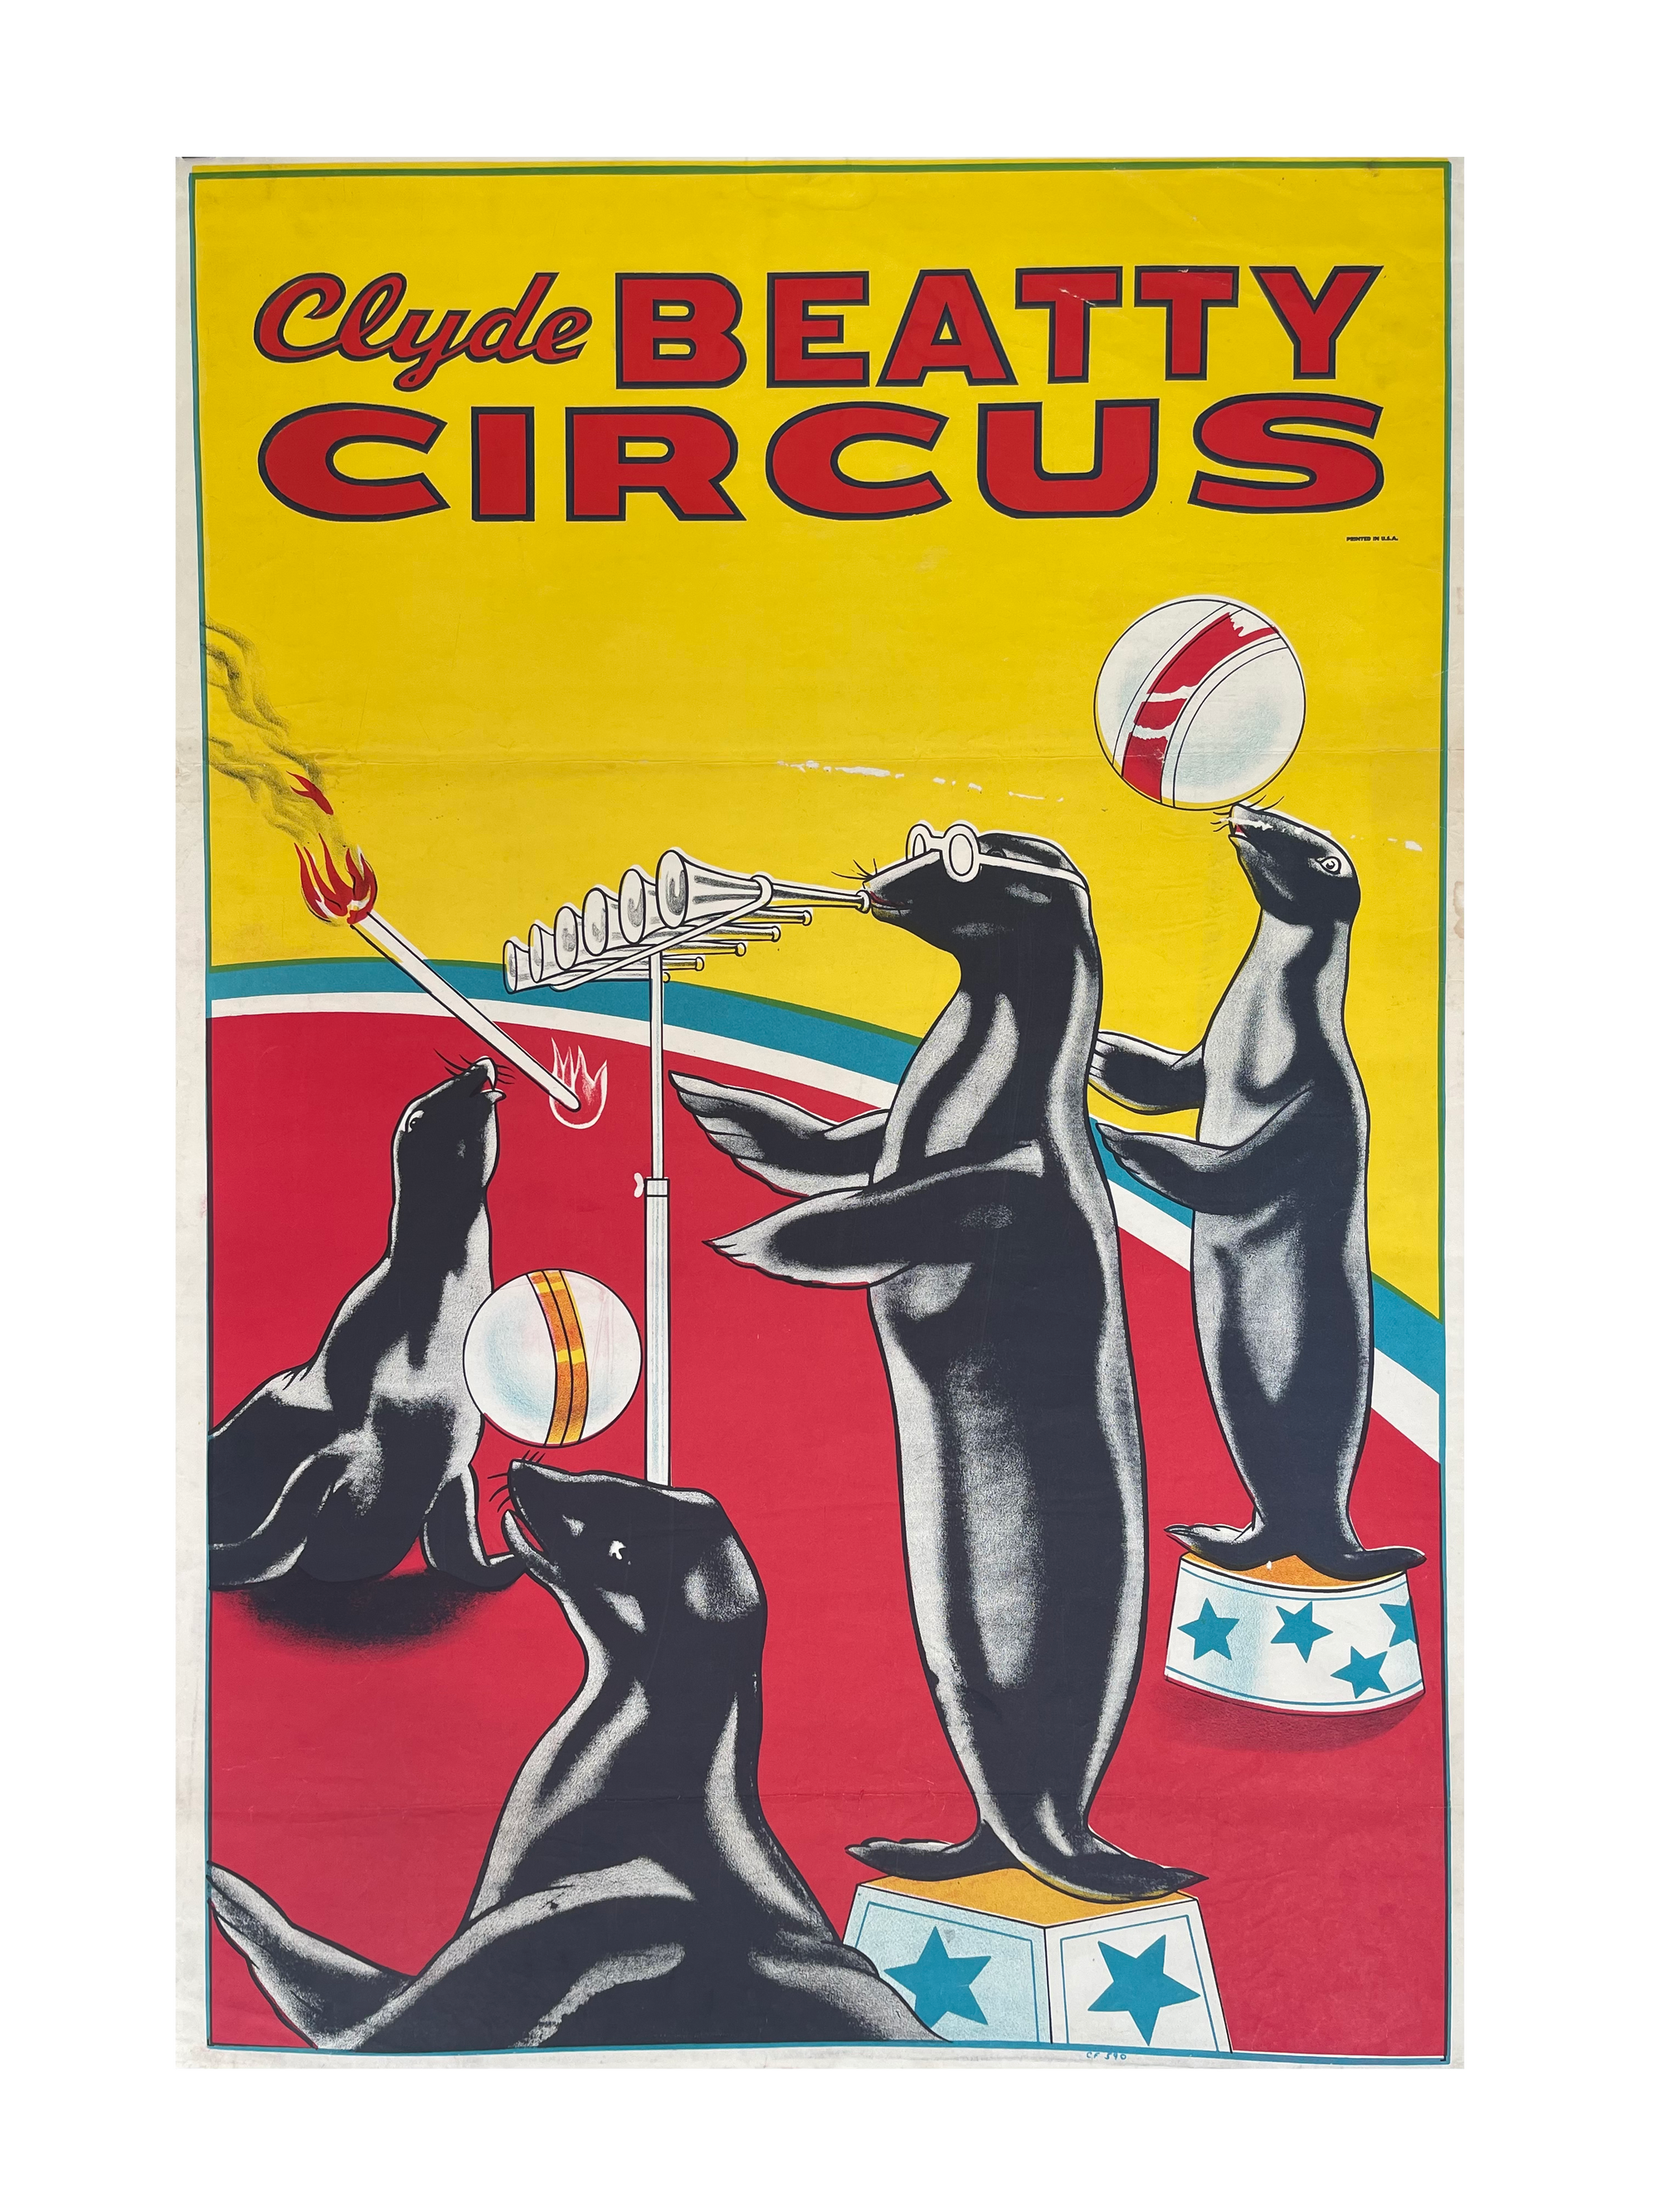 Clyde Beauty Circus Promotion